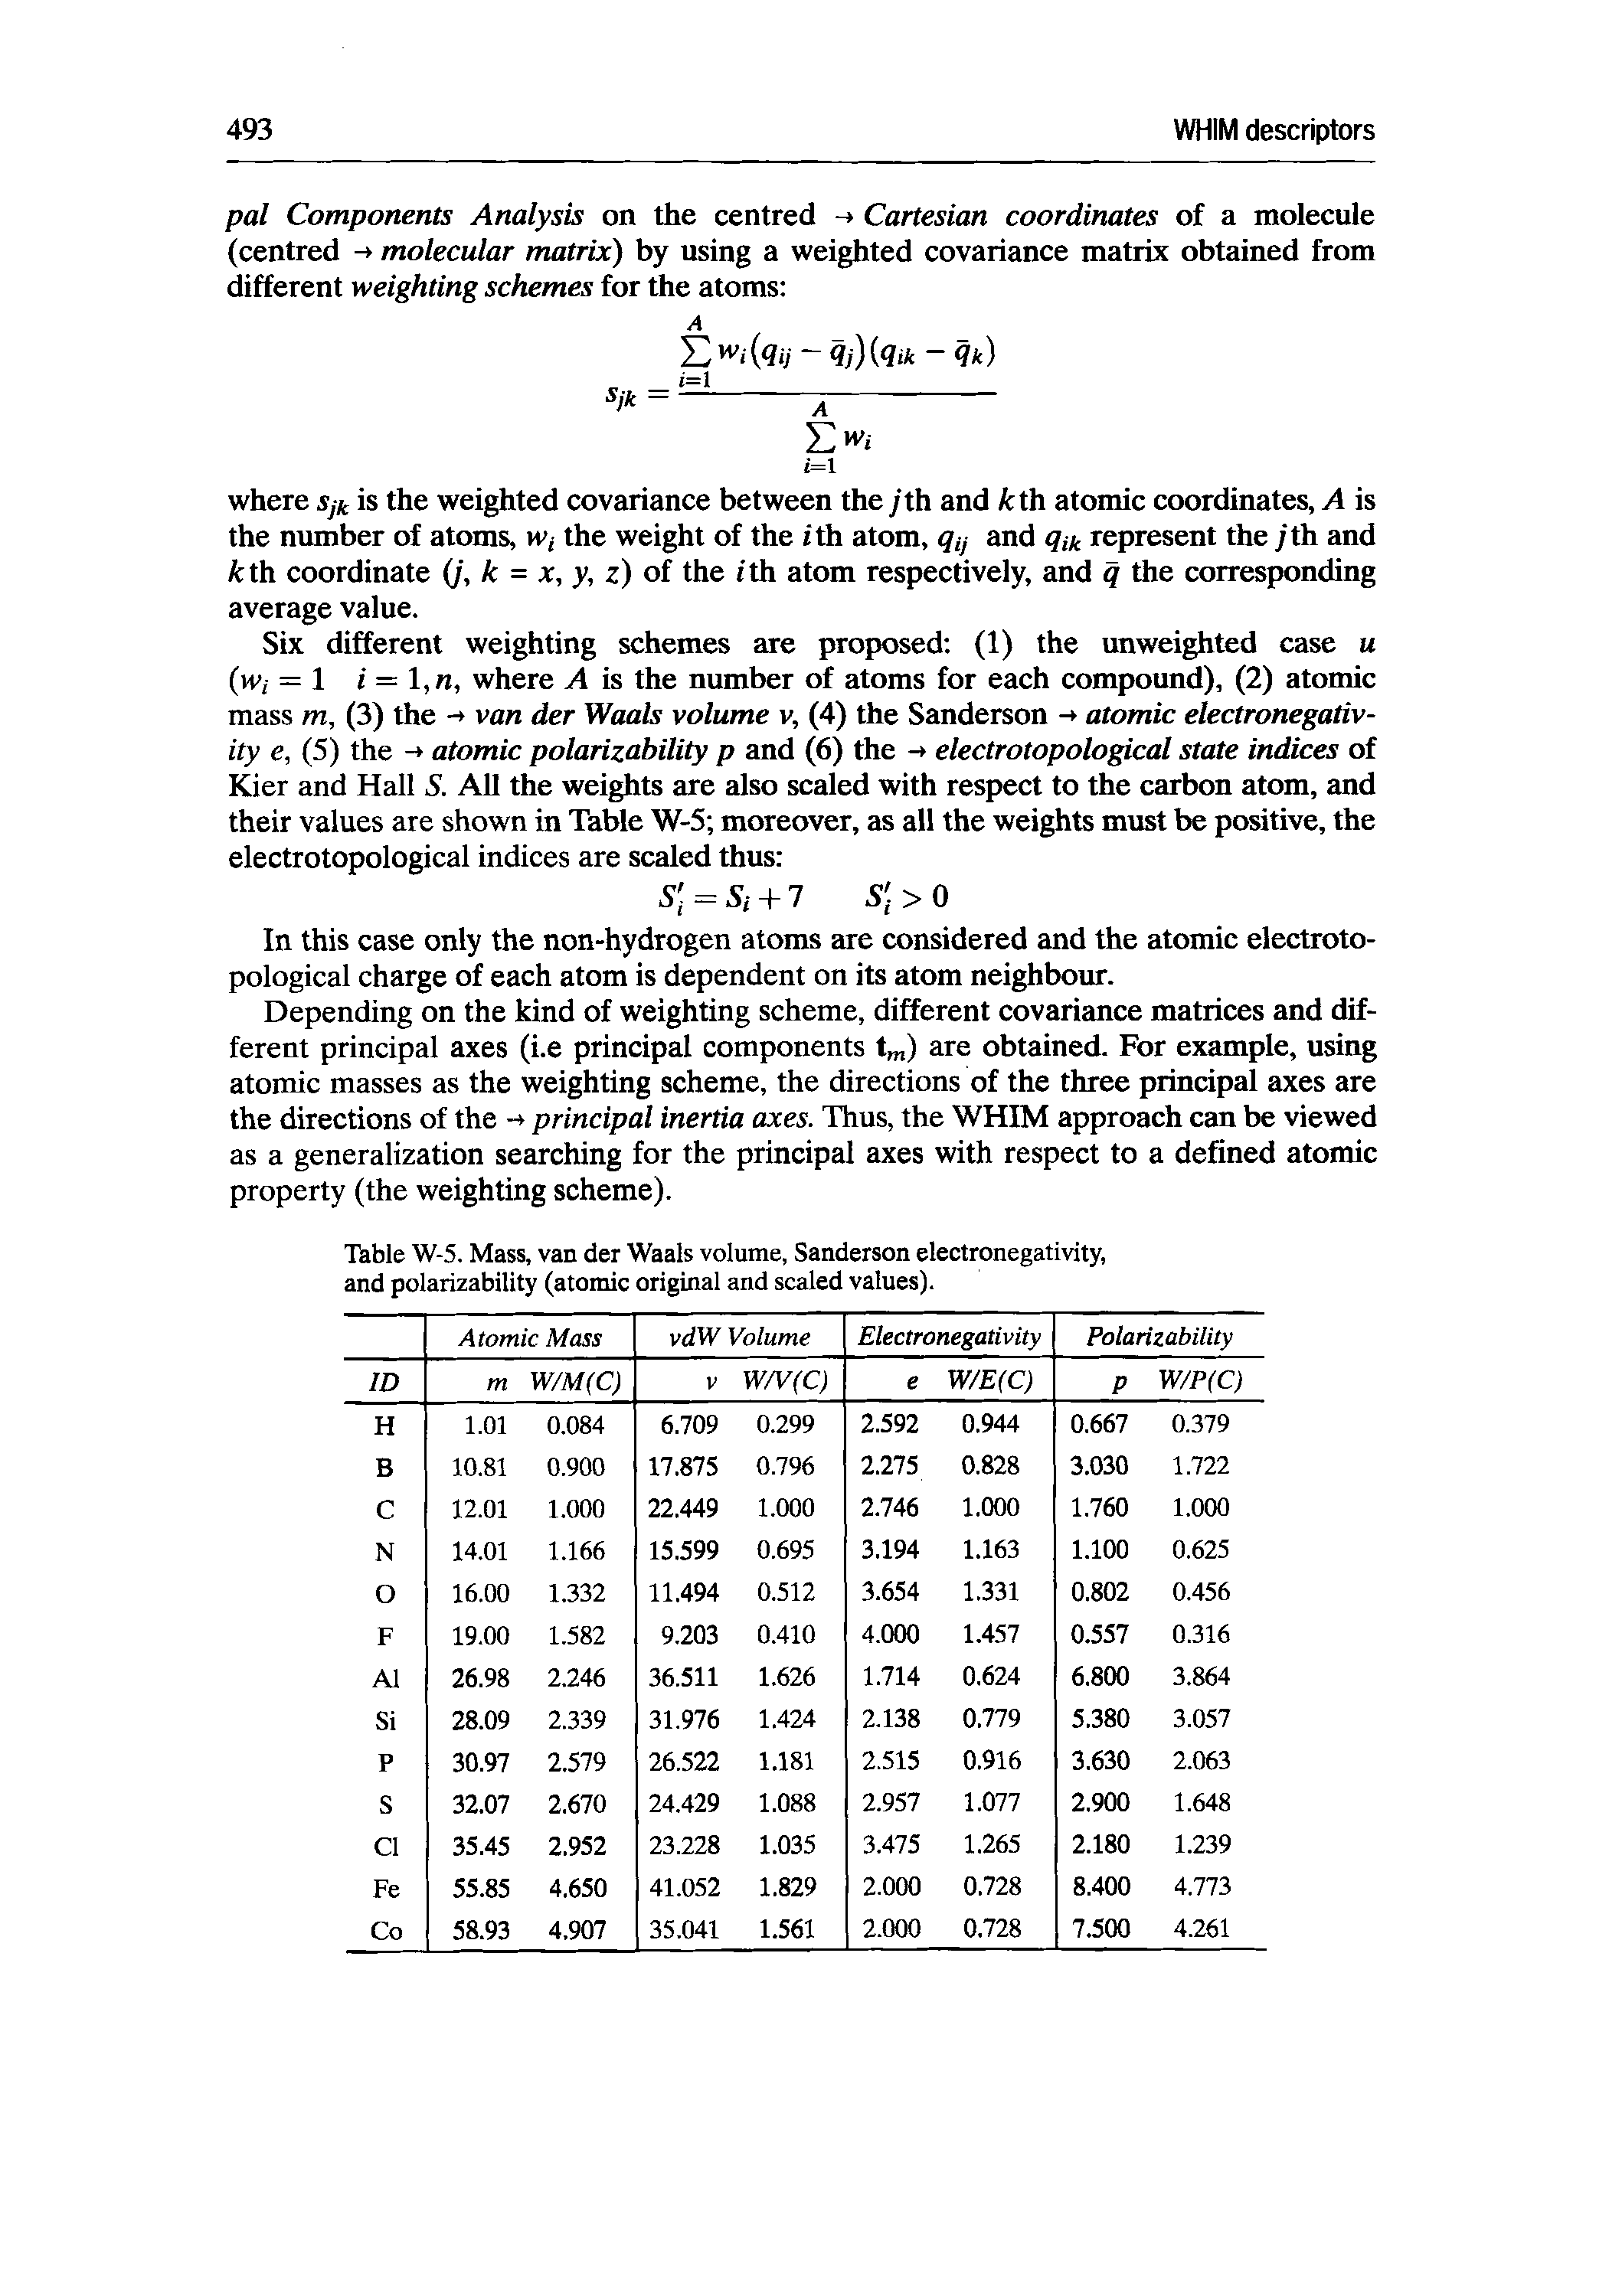 Table W-5. Mass, van der Waals volume, Sanderson electronegativity, and polarizability (atomic original and scaled values).